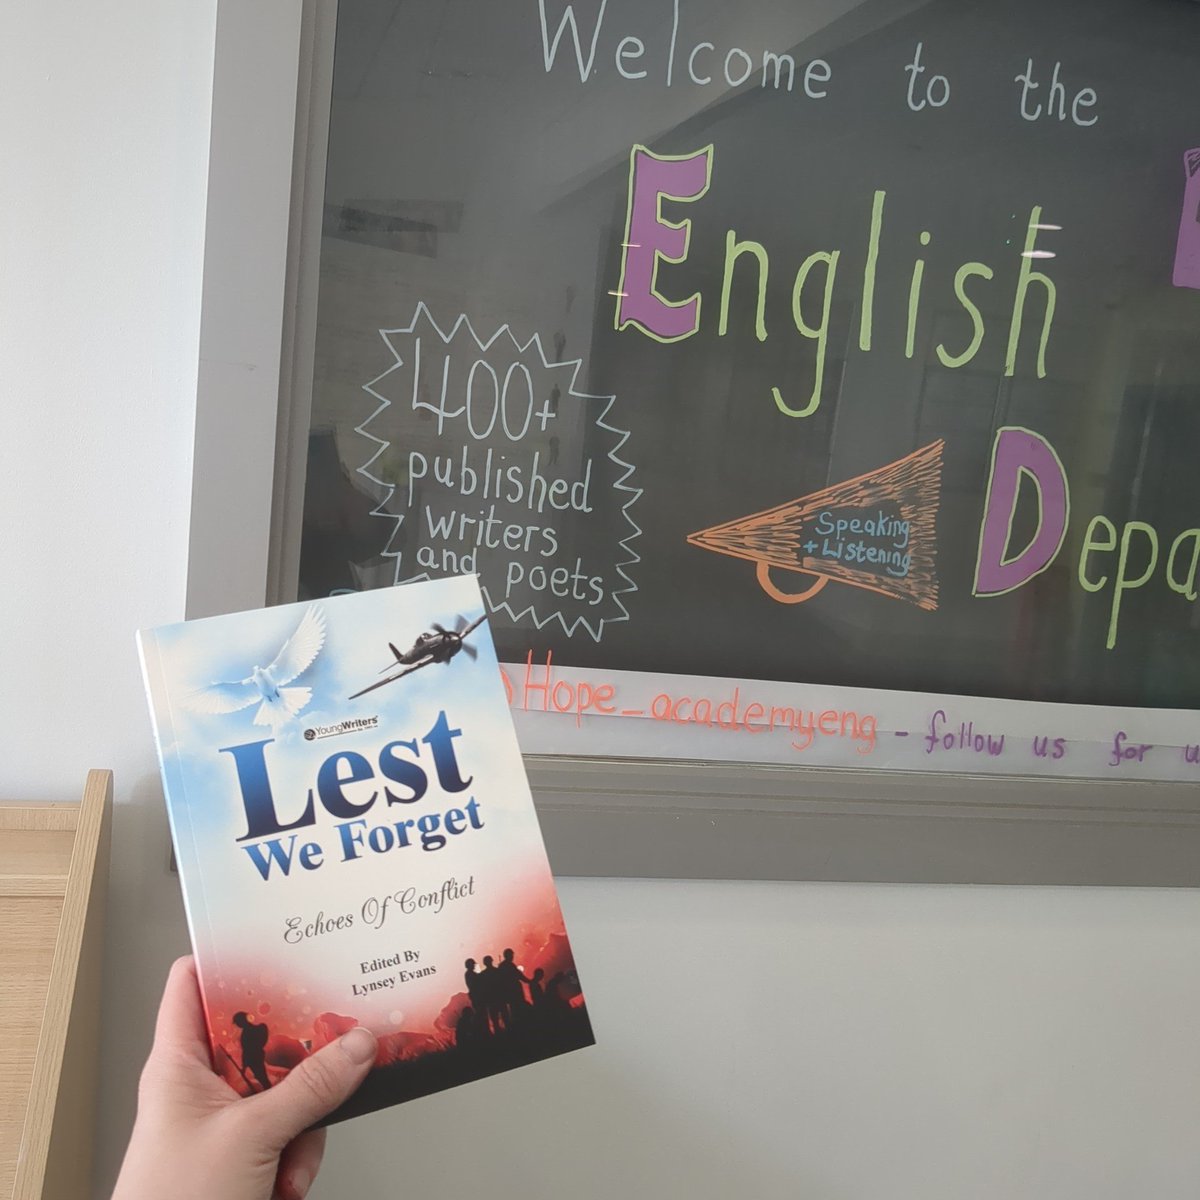 Just in time for World Book Day ... Congratulations to our 8 KS3 students who were published in the Young Writers 'Lest We Forget' competition!